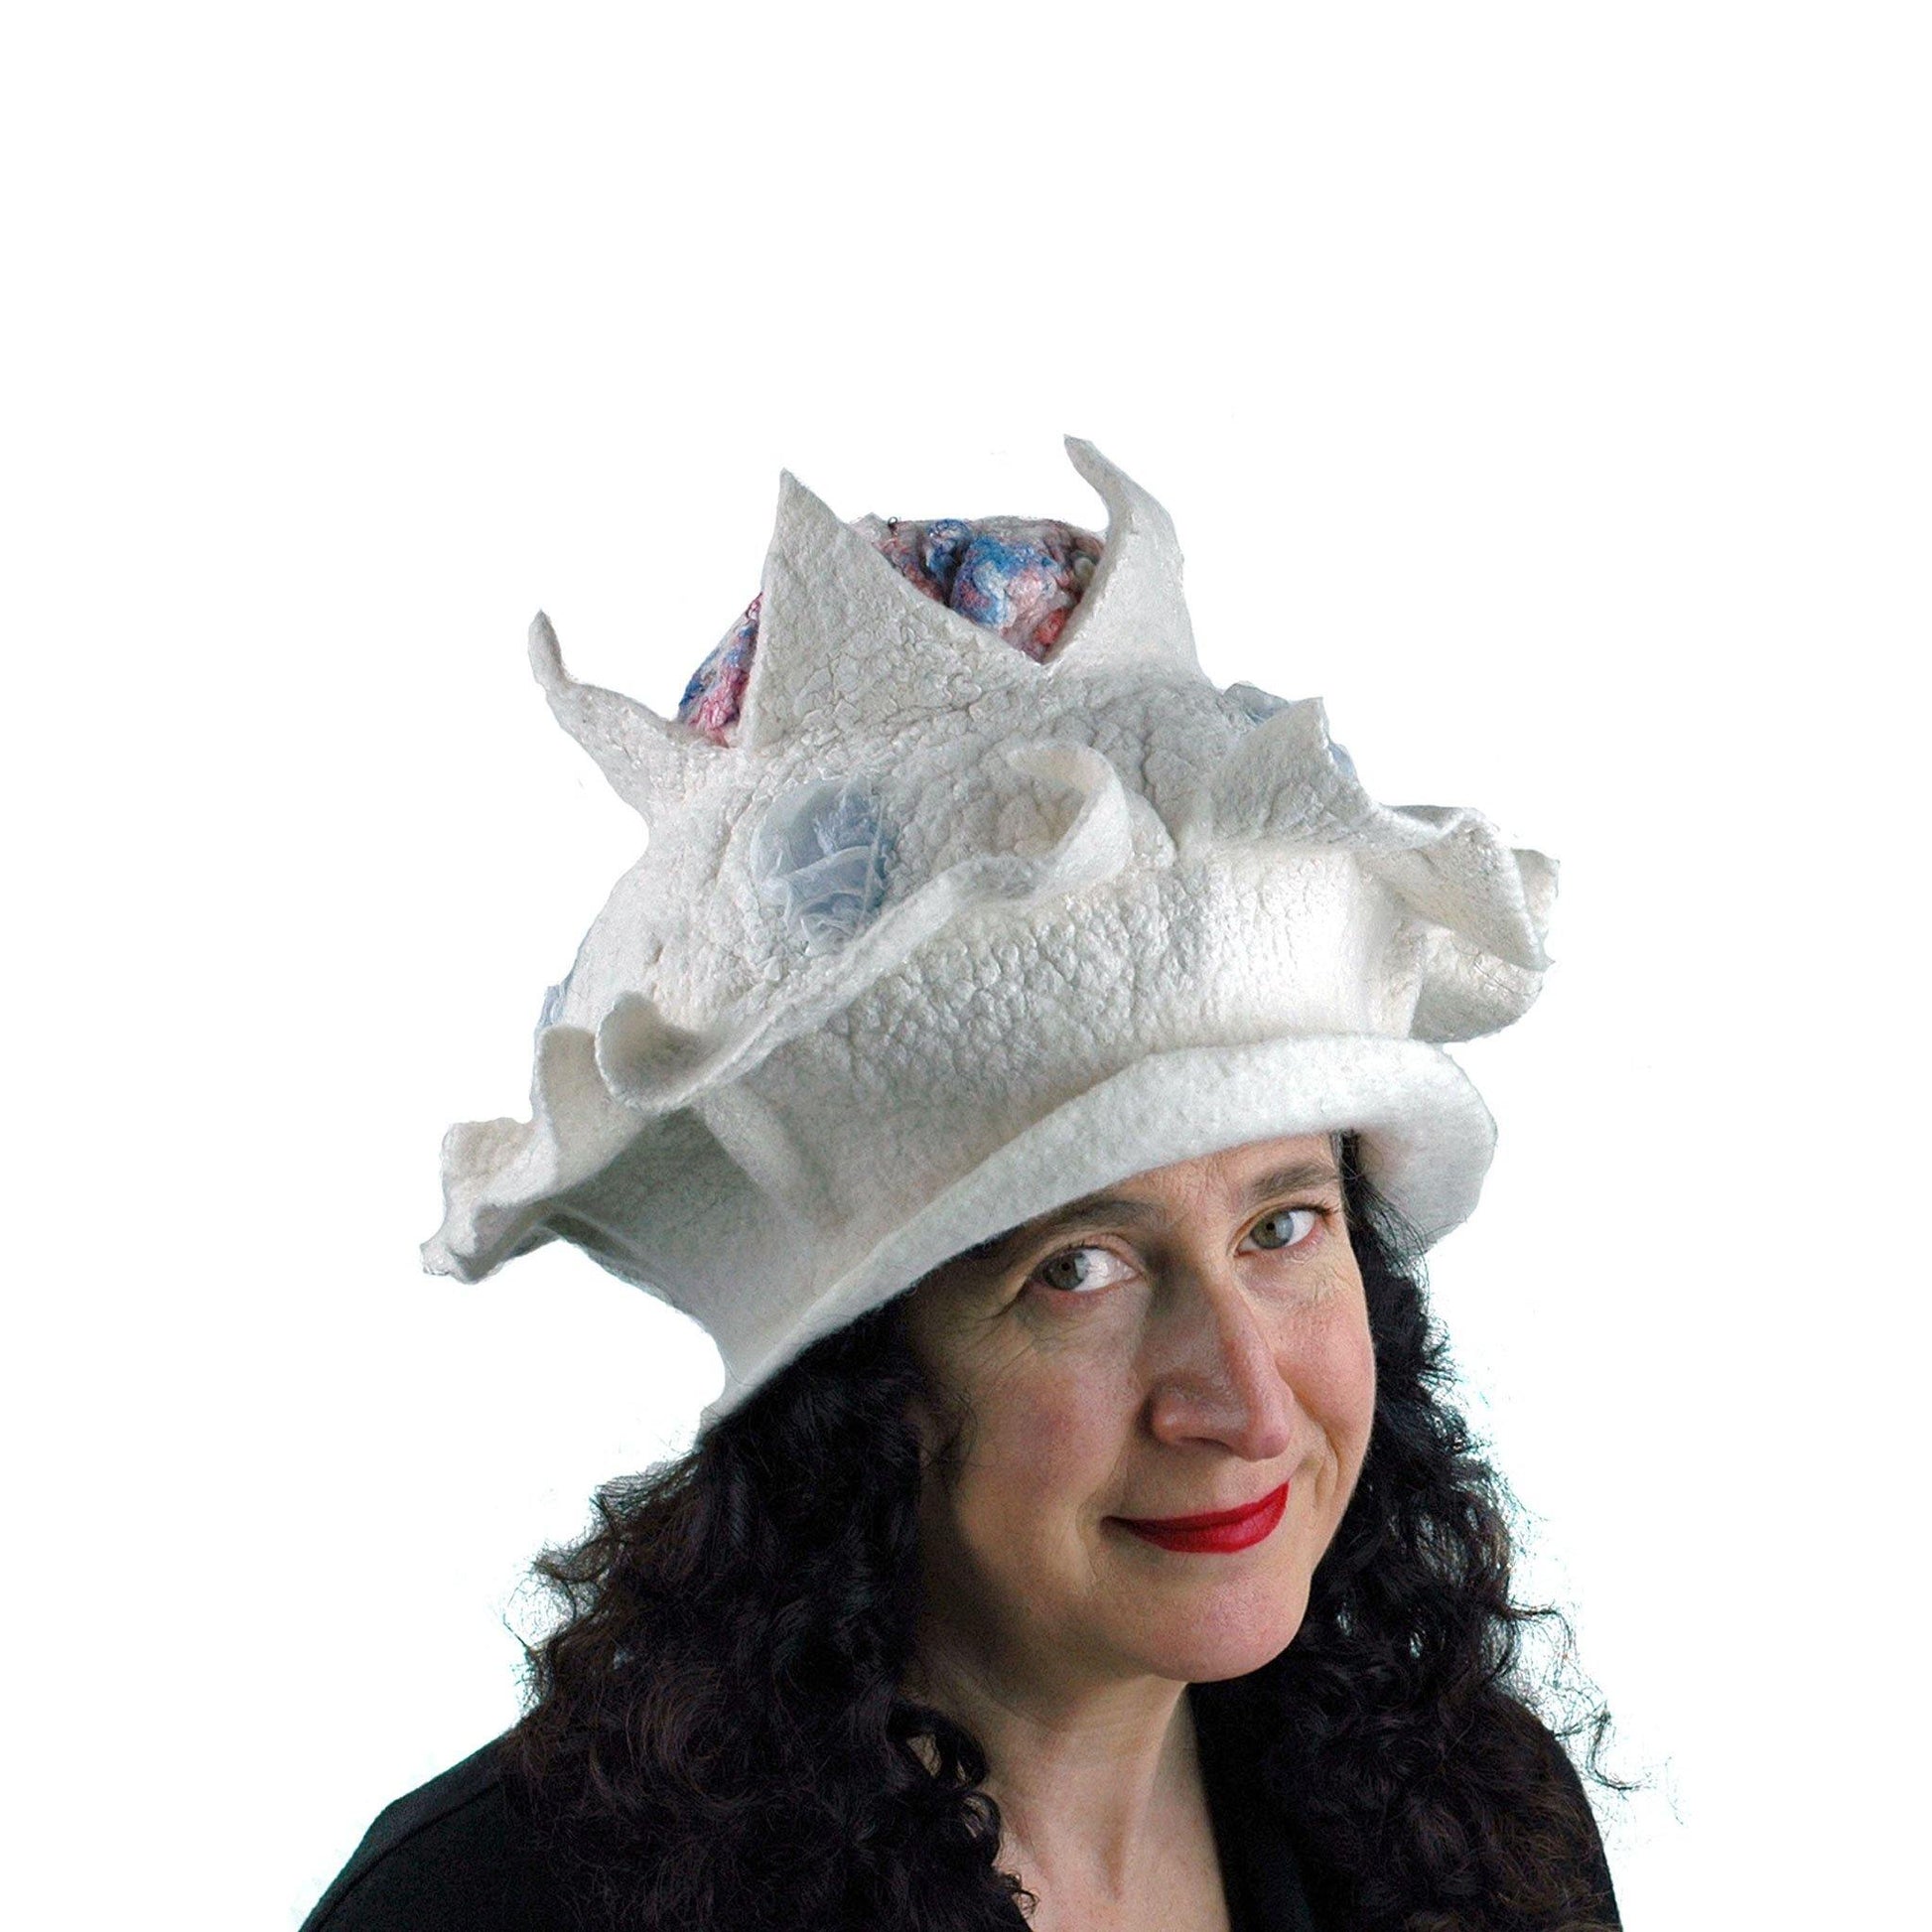 Surreal Brain Hat in White, Red and Blue - three quarters view